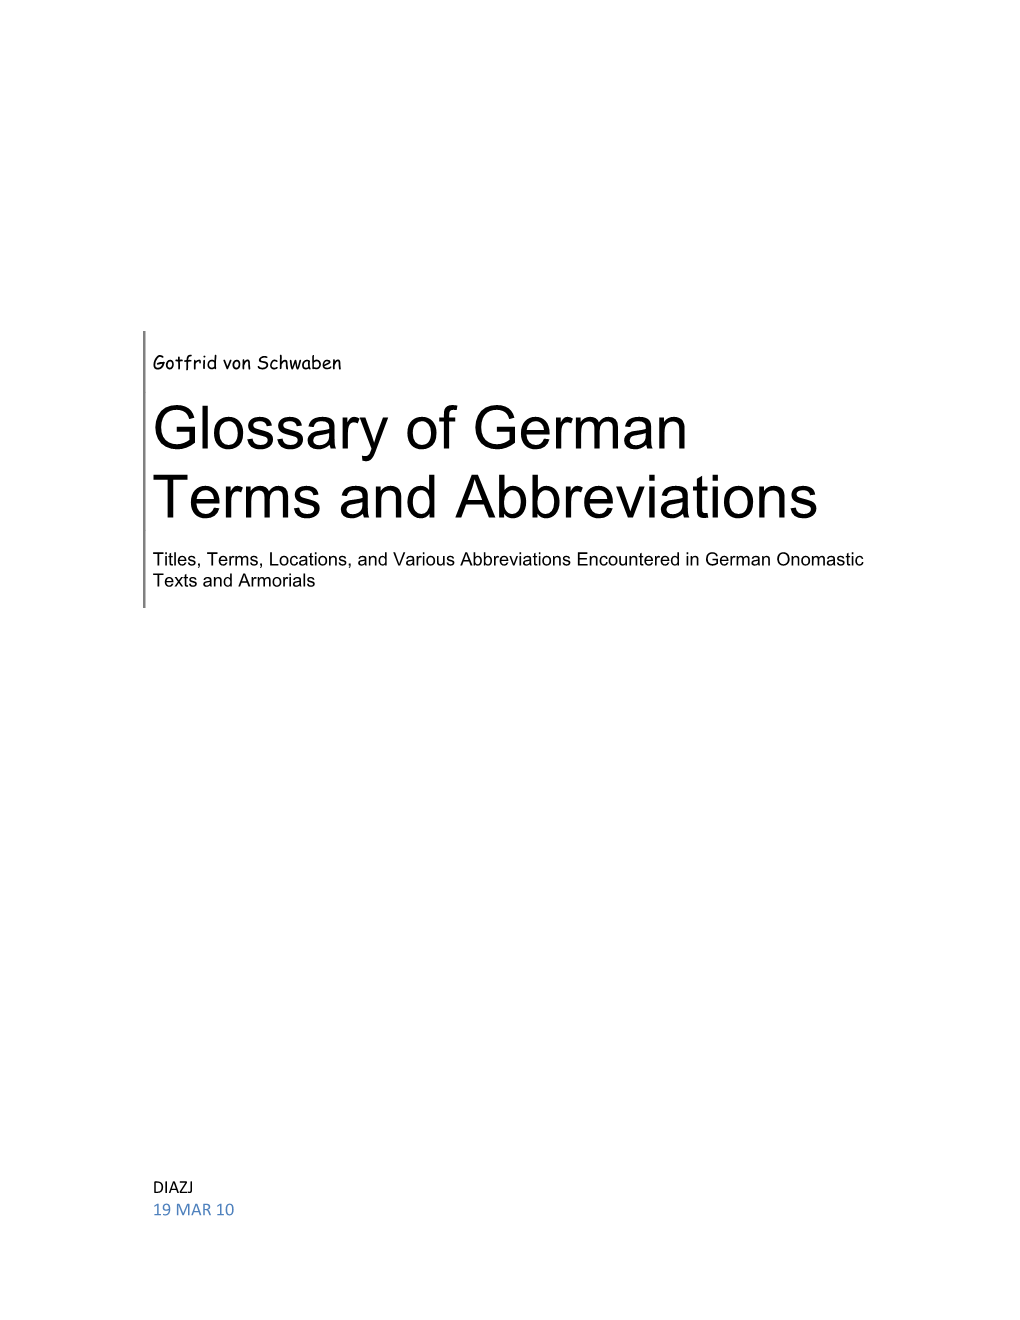 Glossary of German Terms and Abbreviations